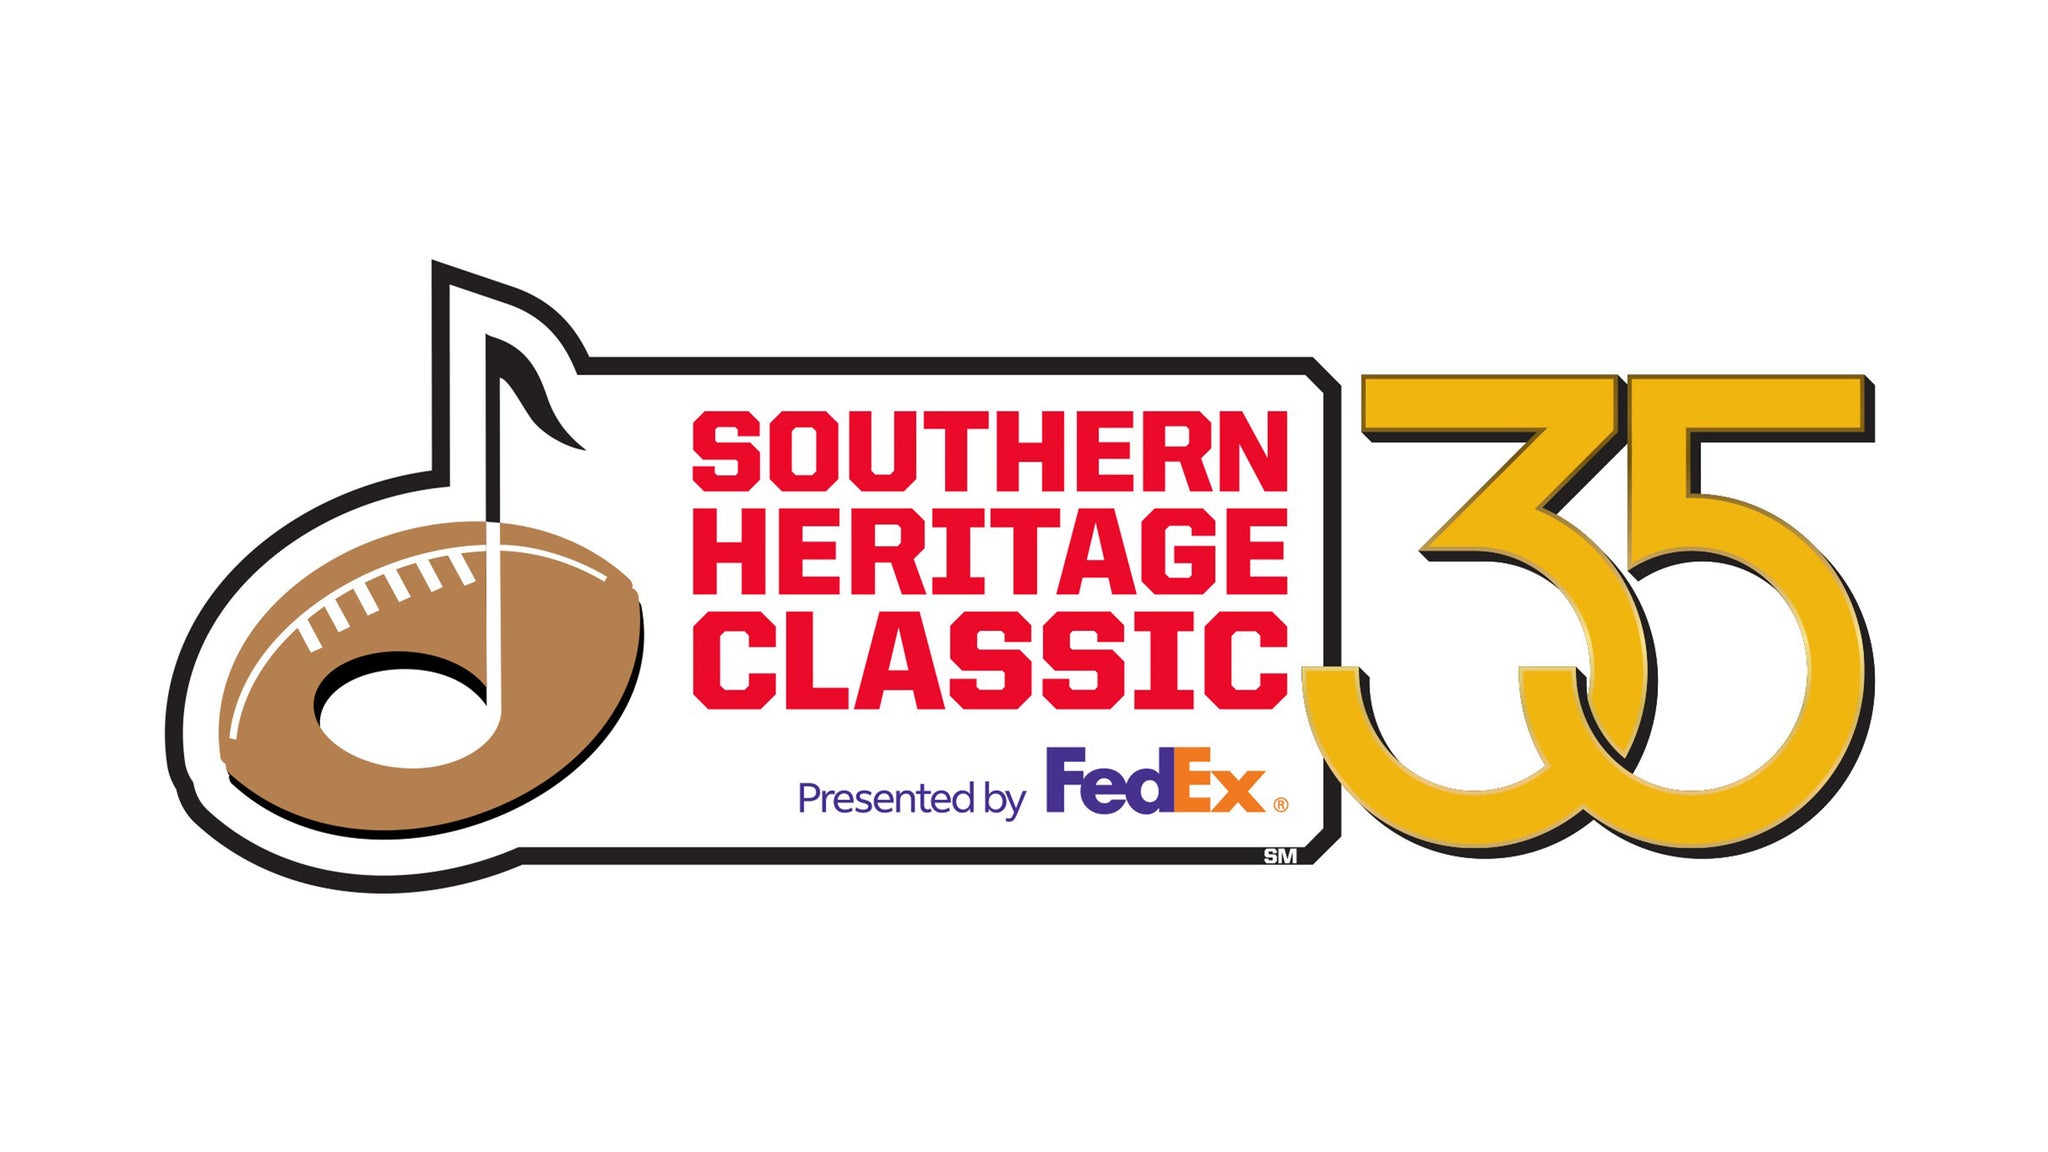 Southern Heritage Classic : Tailgating Packages